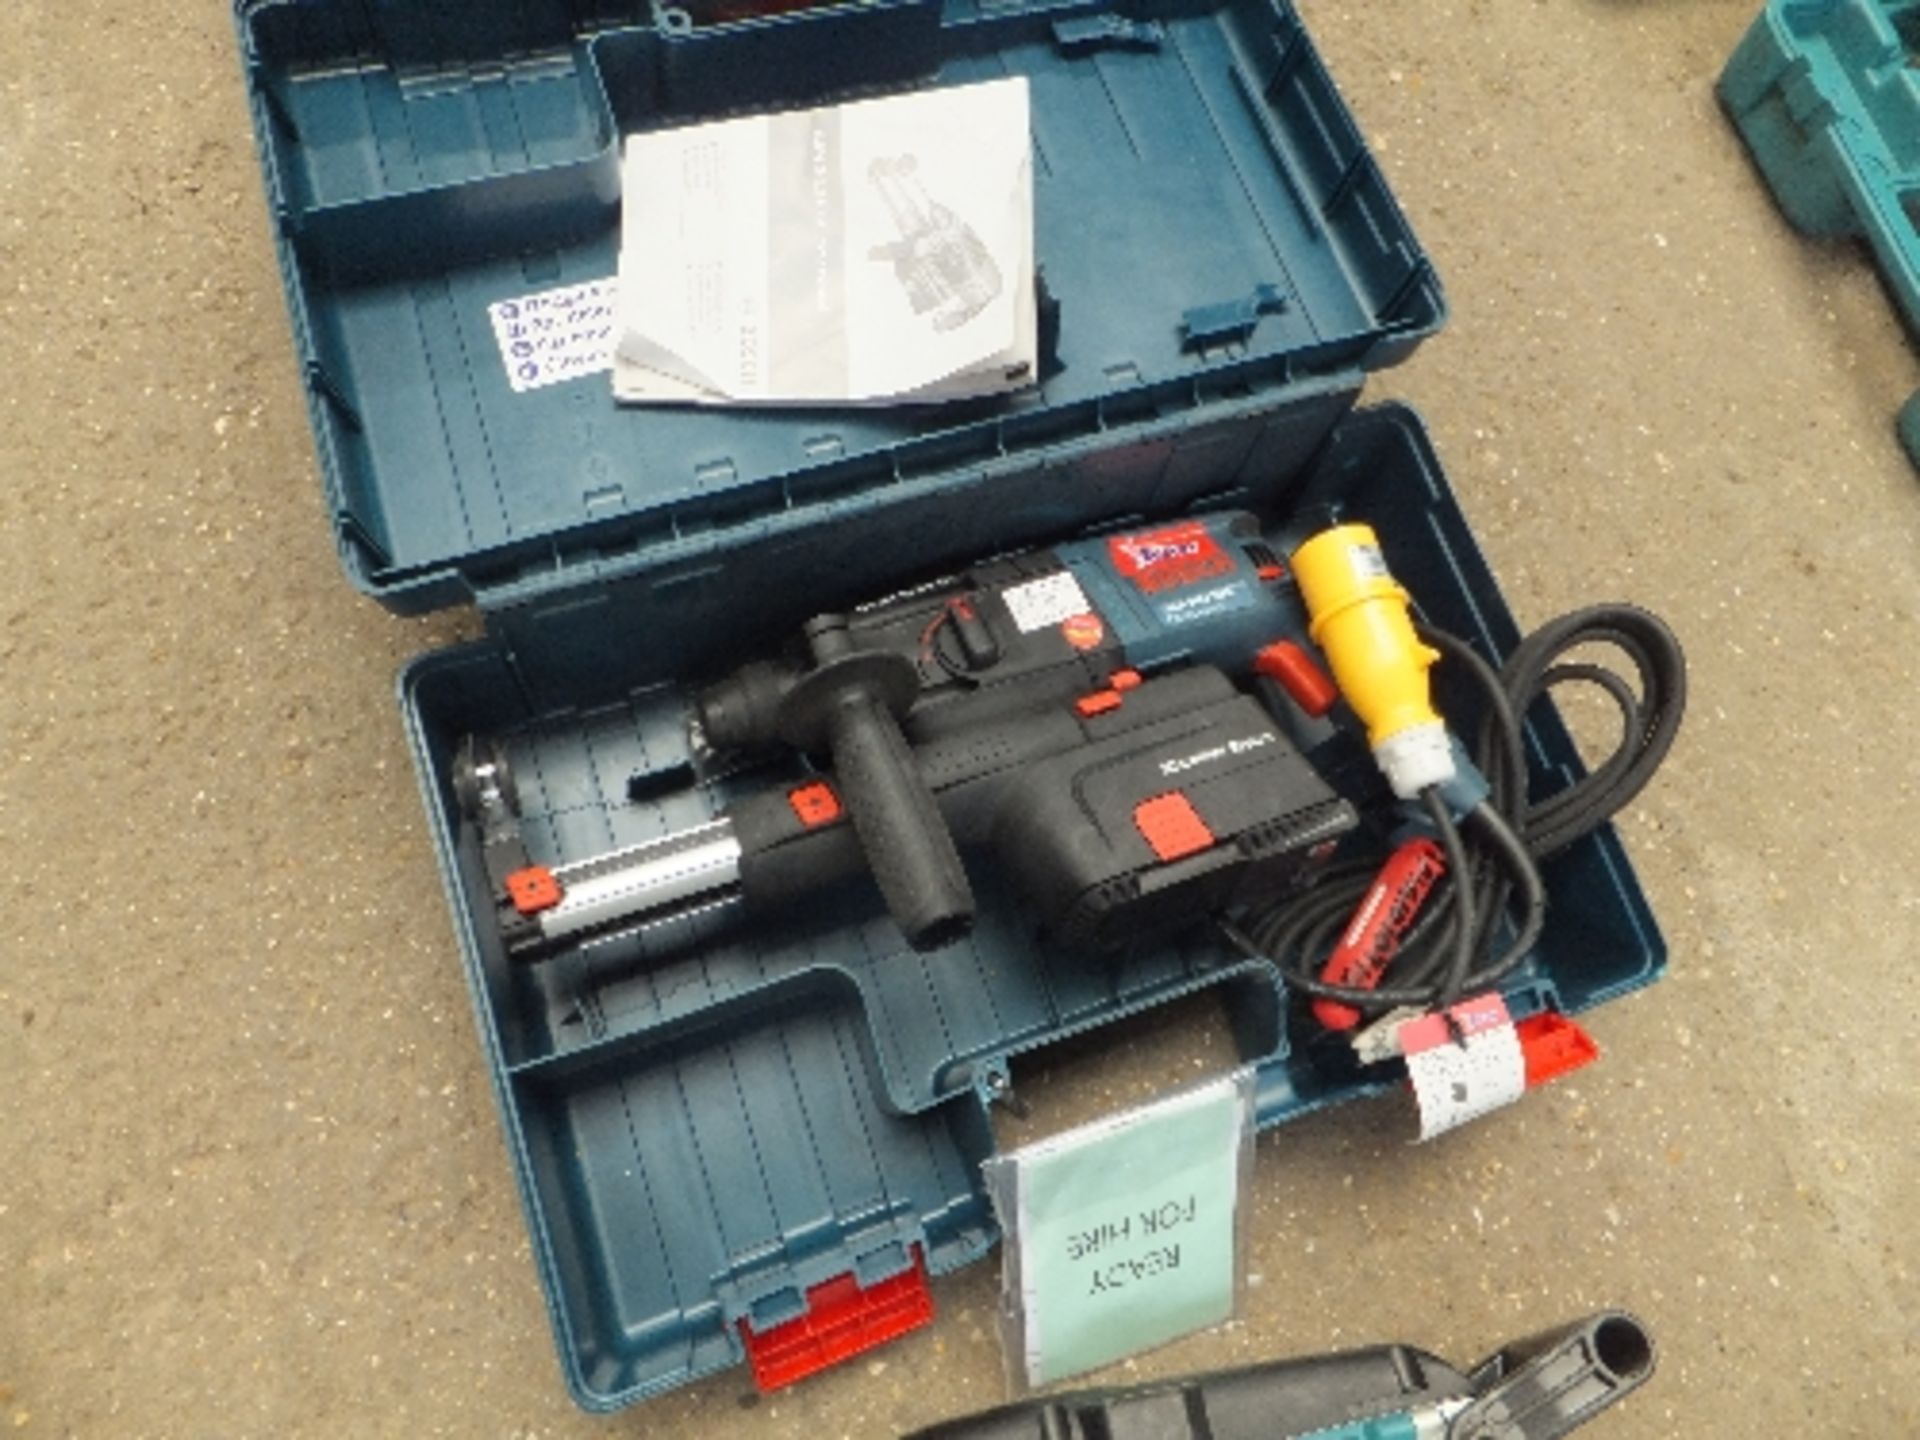 Bosch GBH2.23 drill with micro filter system